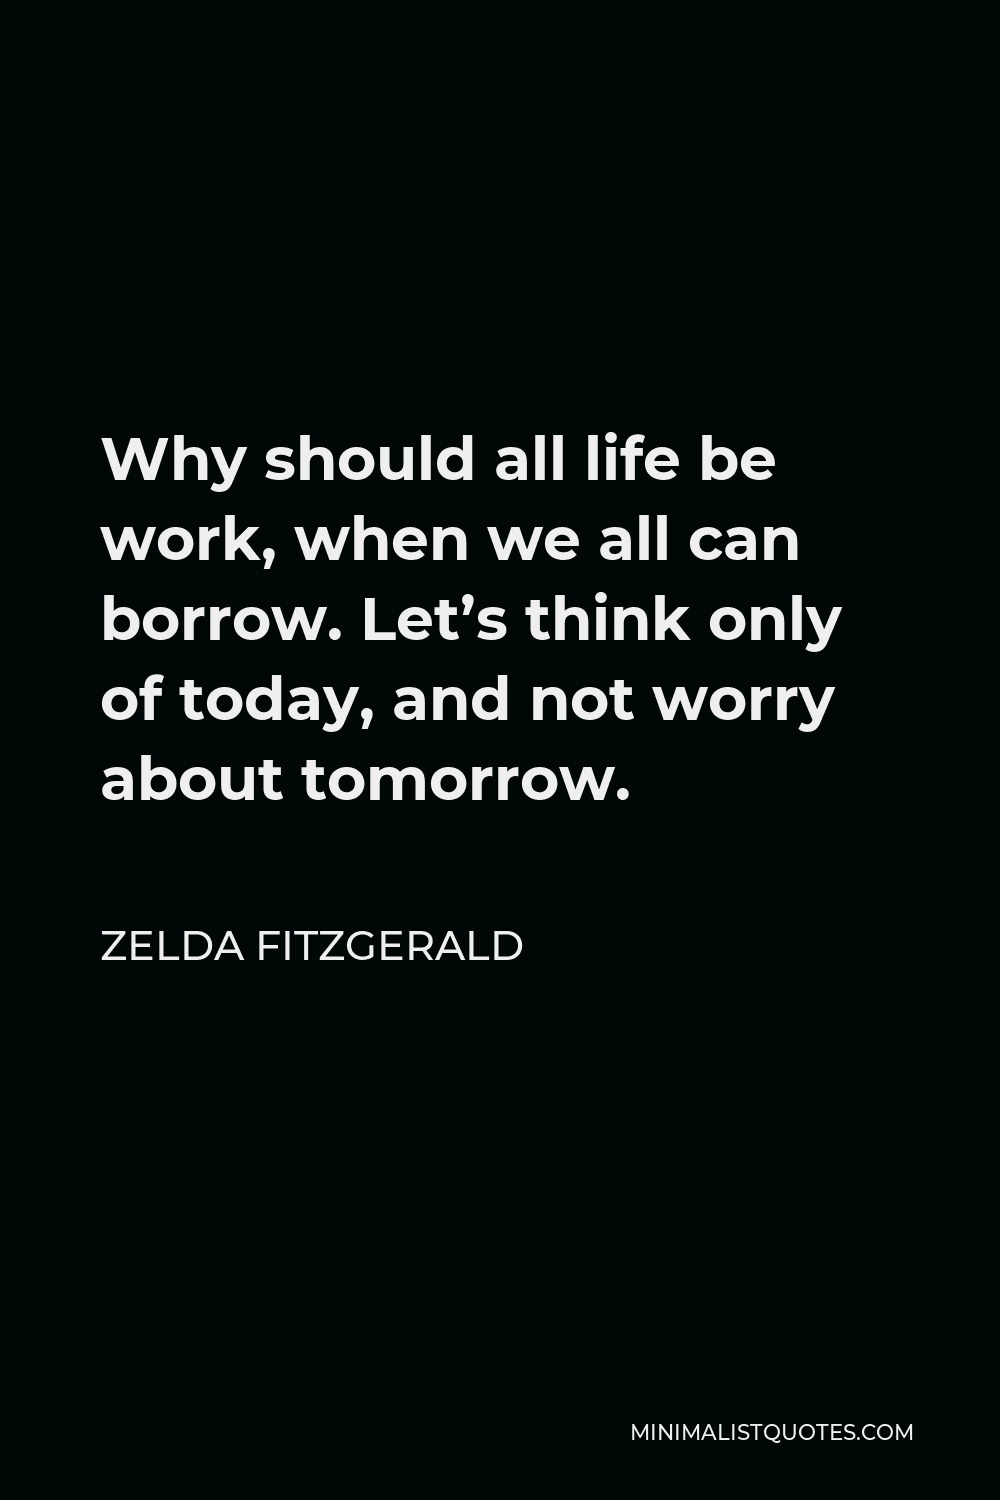 Zelda Fitzgerald Quote - Why should all life be work, when we all can borrow. Let’s think only of today, and not worry about tomorrow.